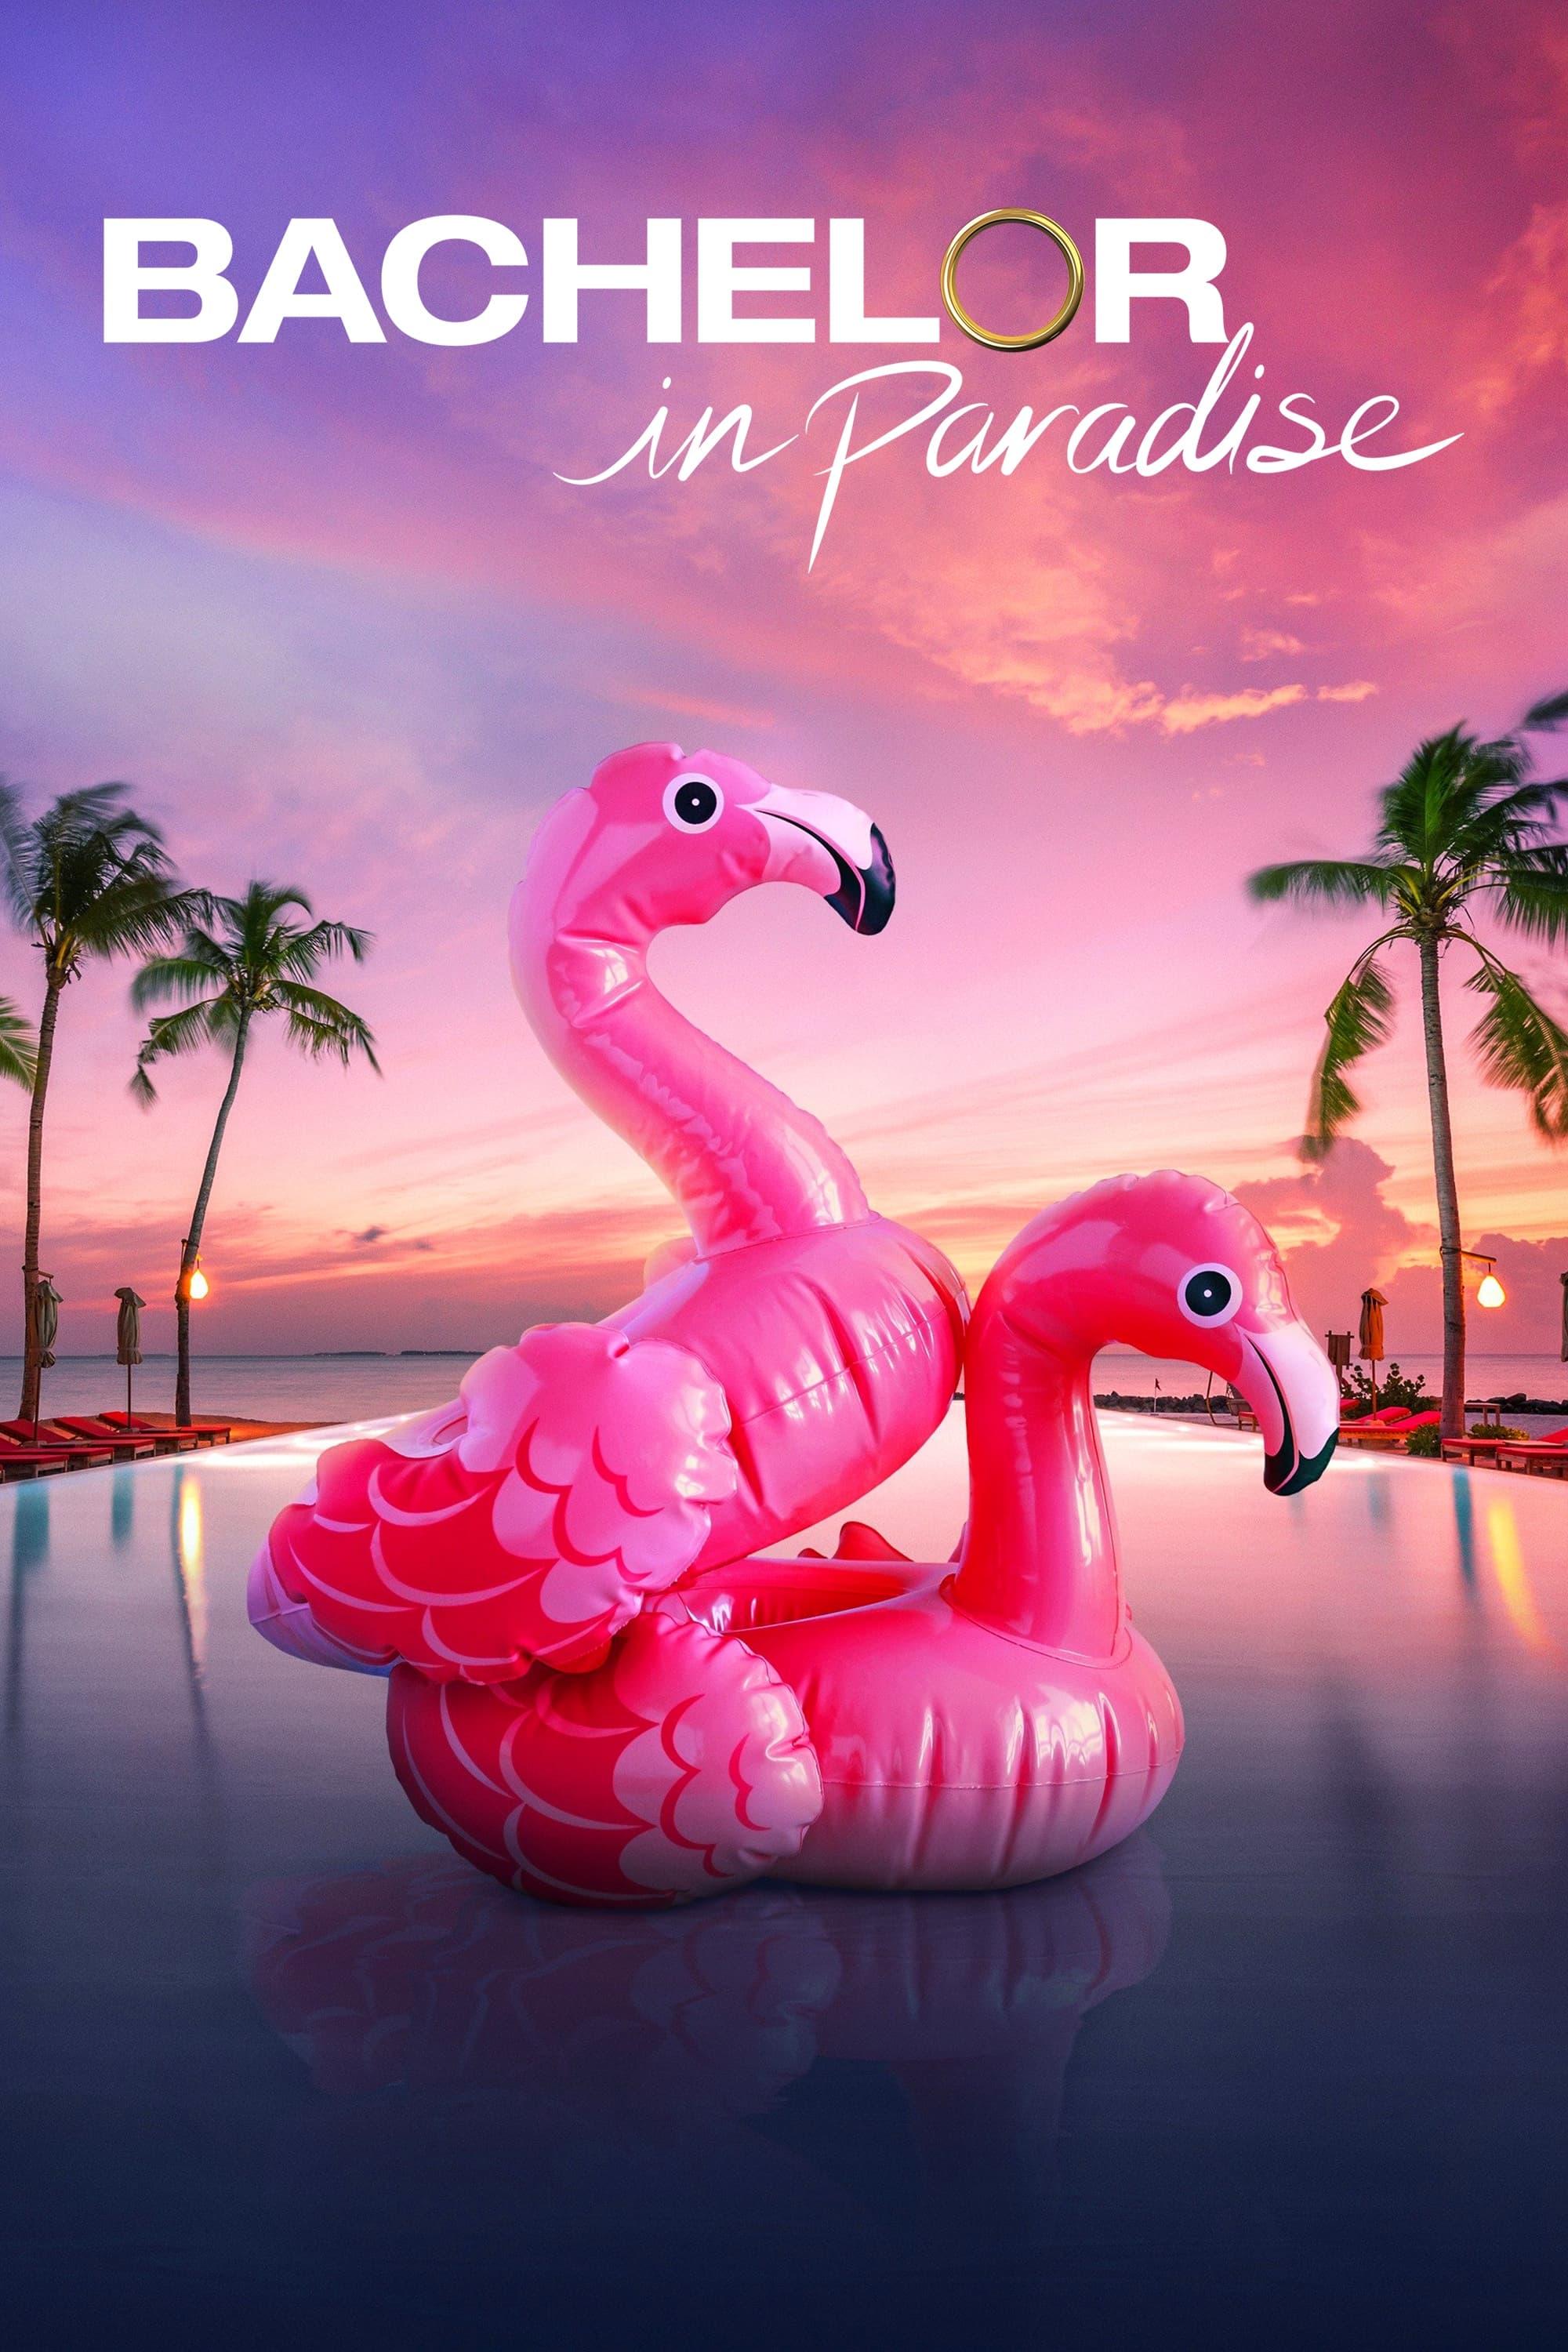 Bachelor in Paradise poster